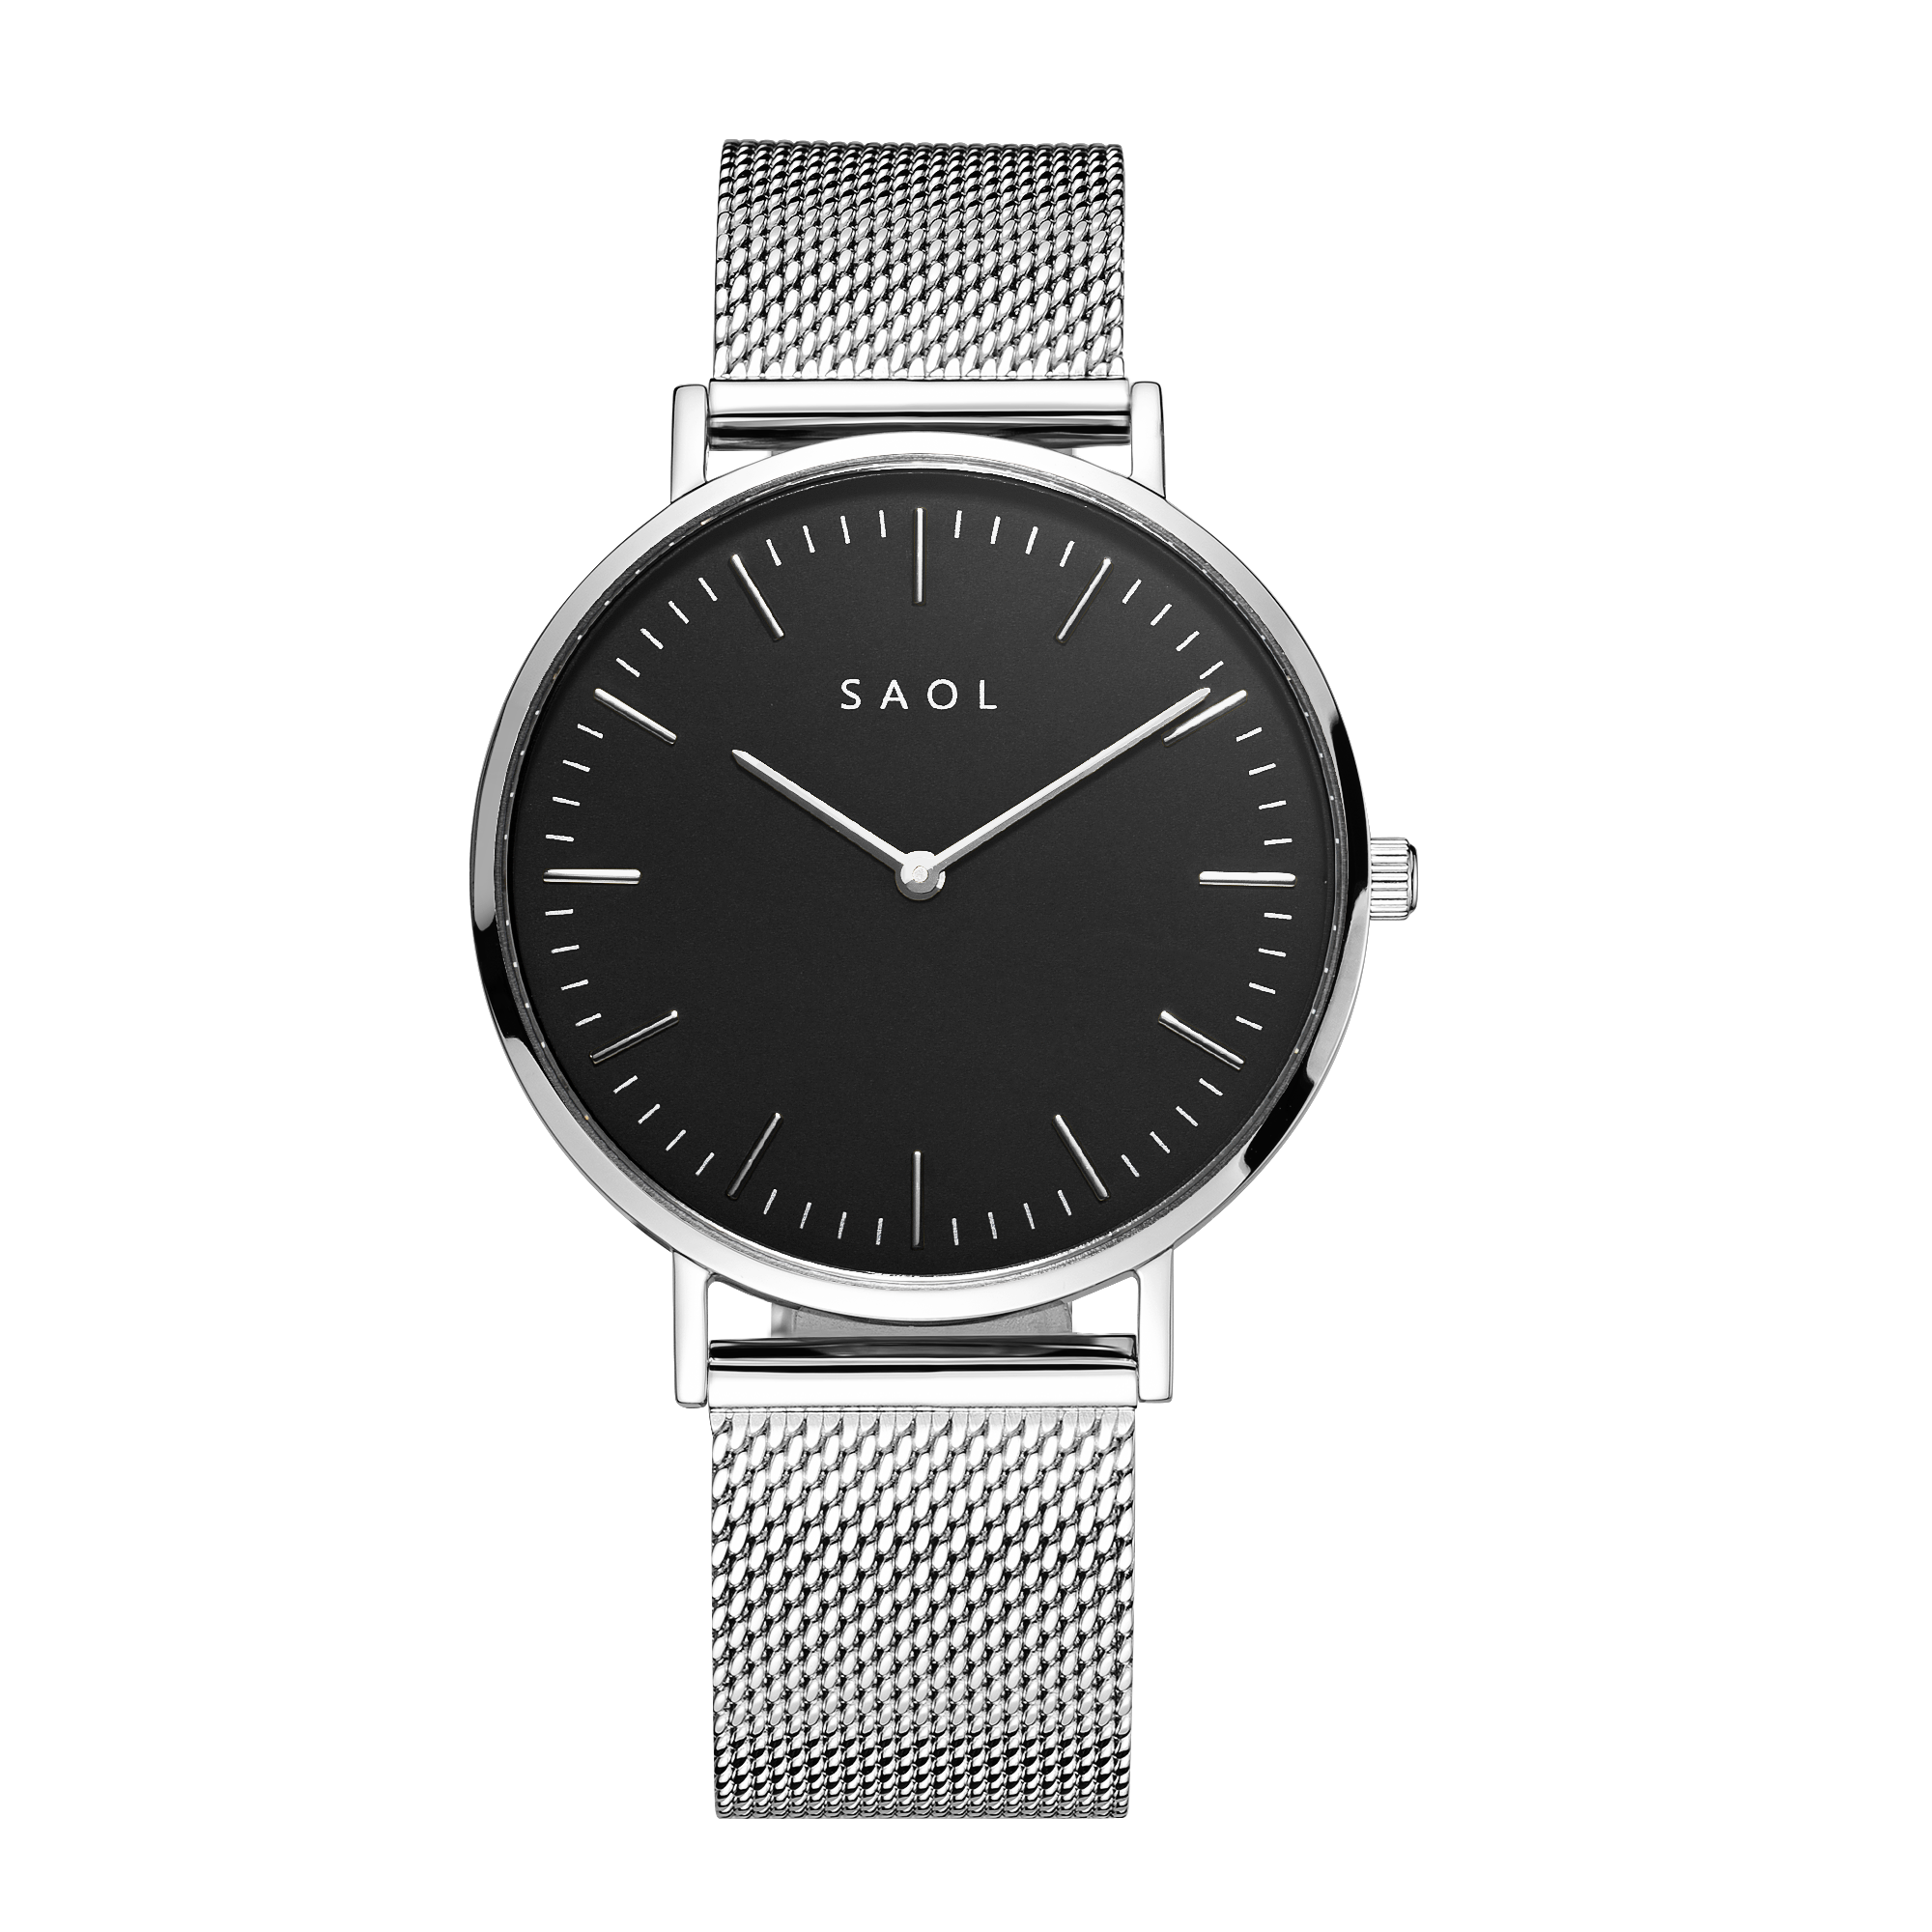 The Standard - Saol Watches